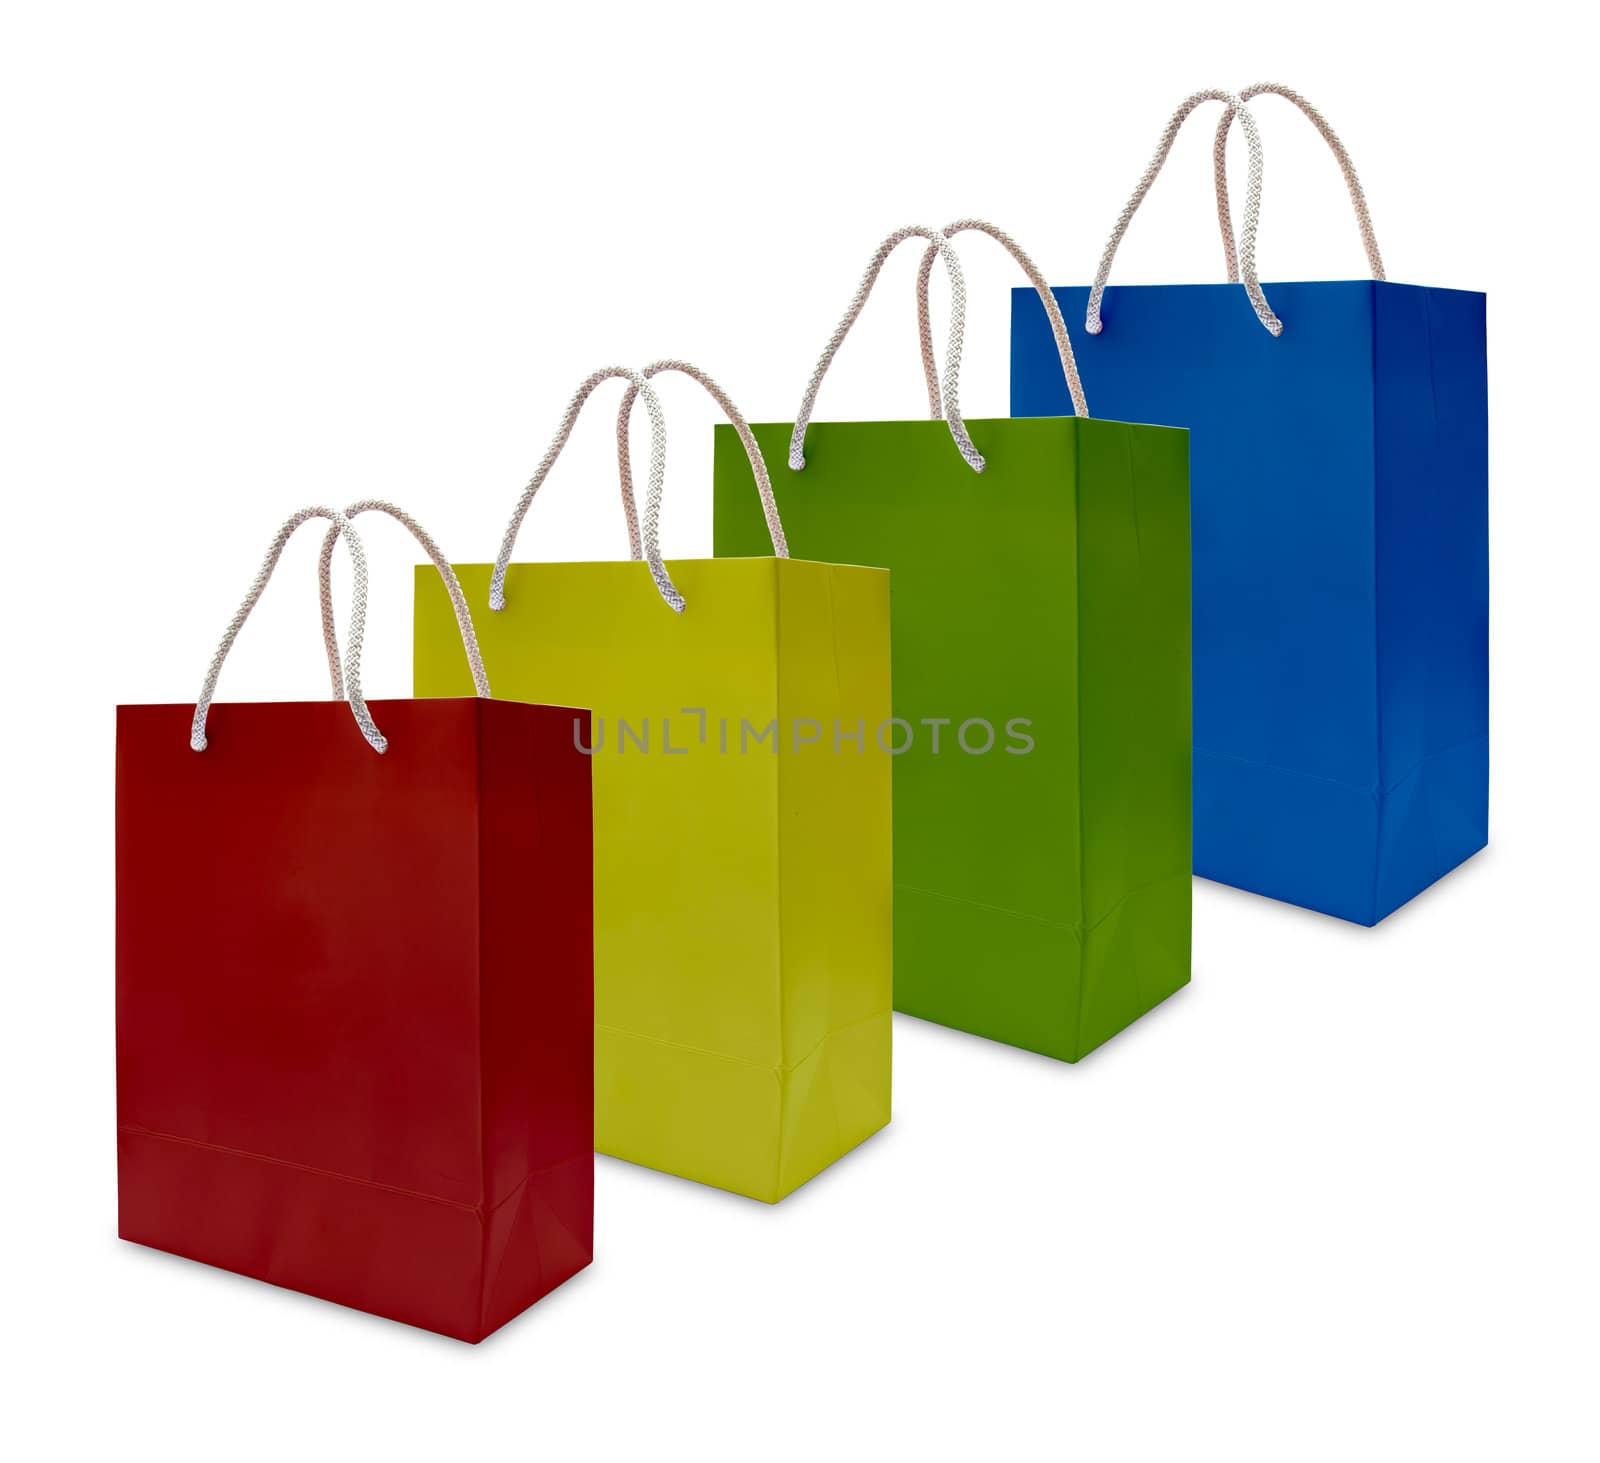 colorful paper shopping bag isolated